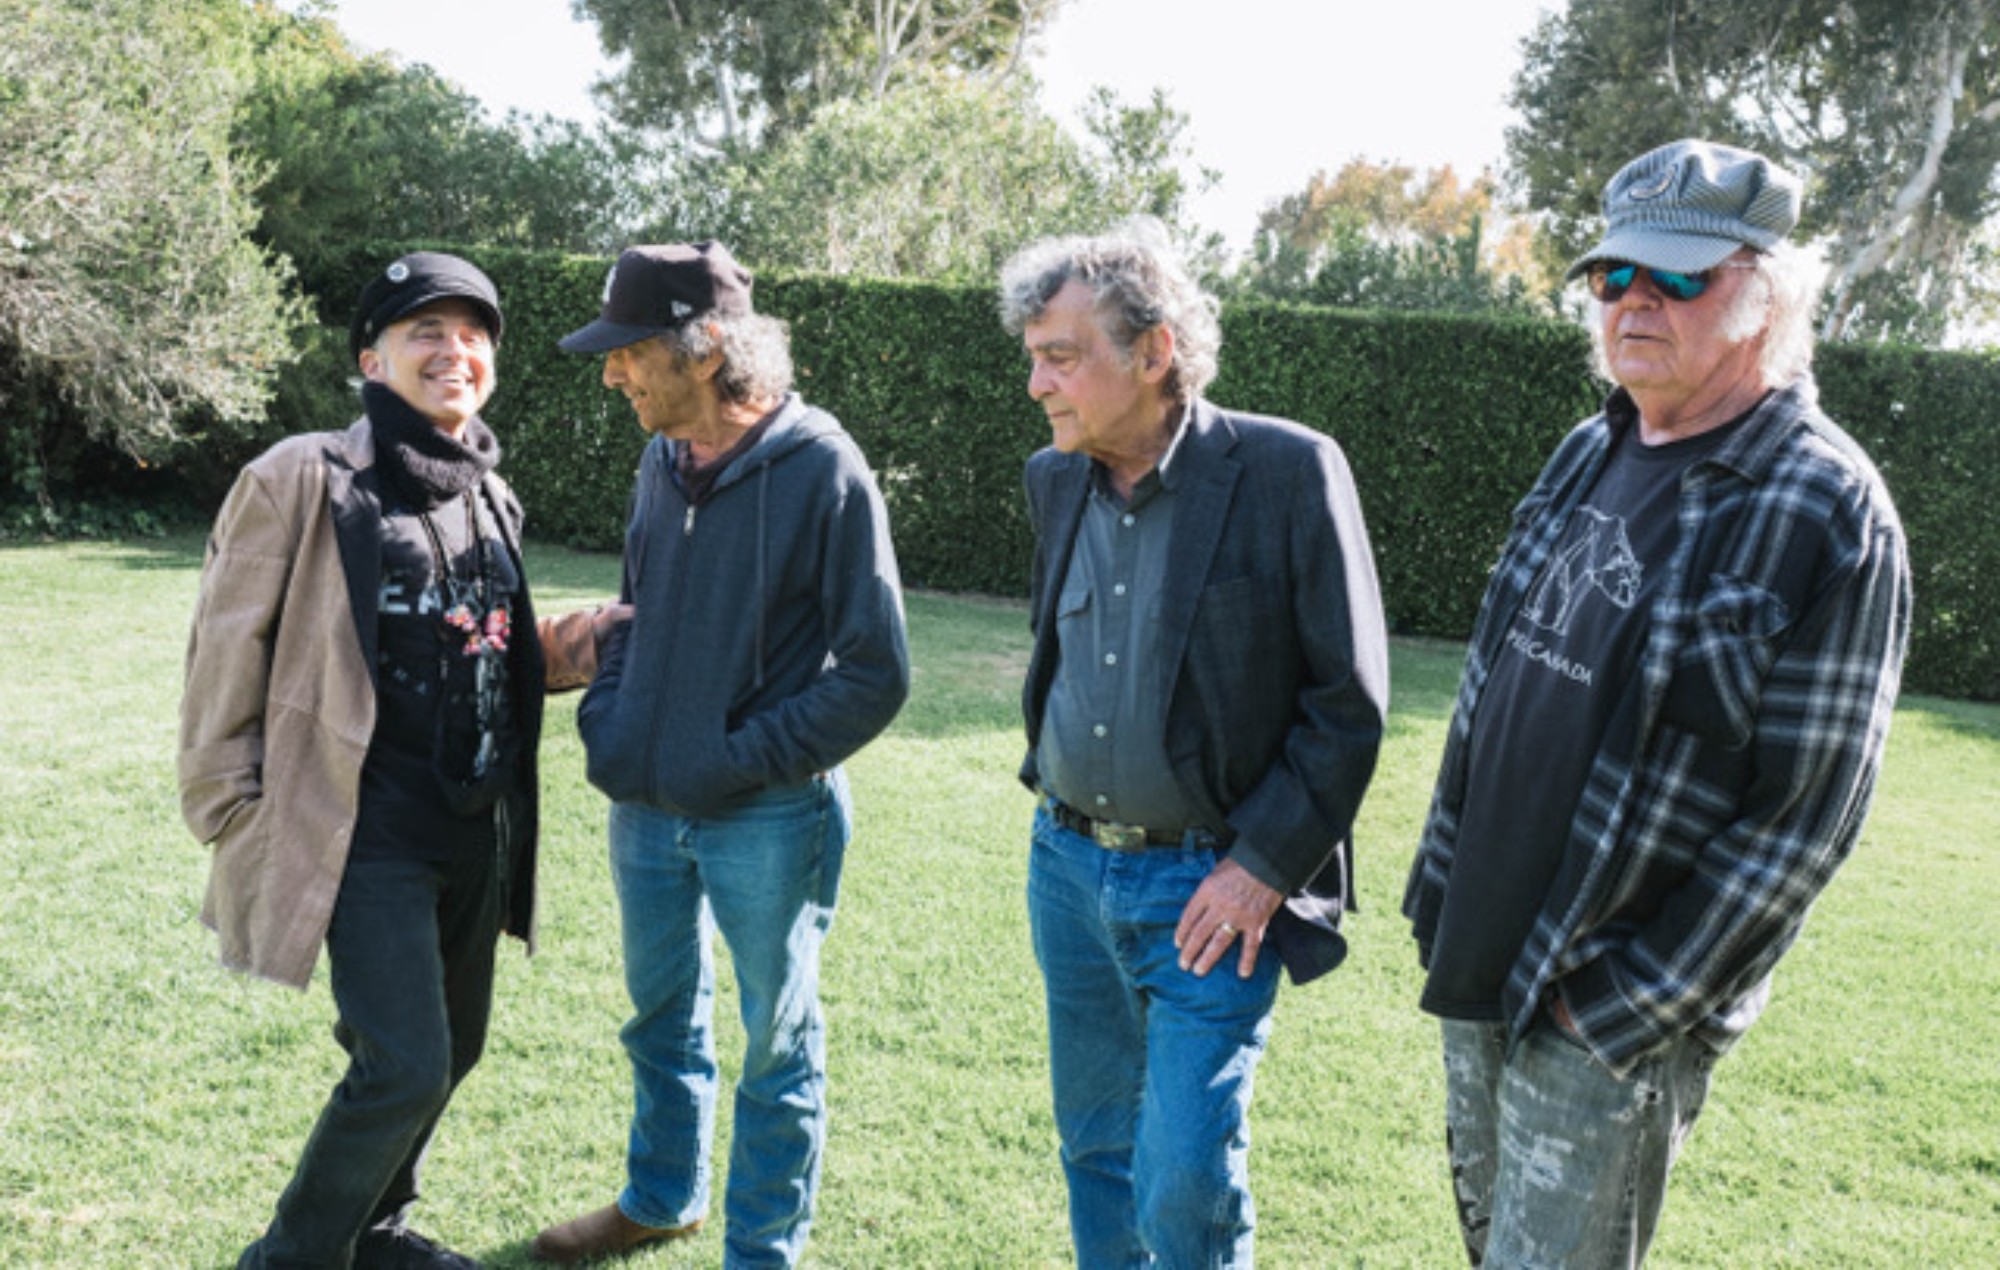 Neil Young and Crazy Horse members announce new album ‘All Roads Lead Home’